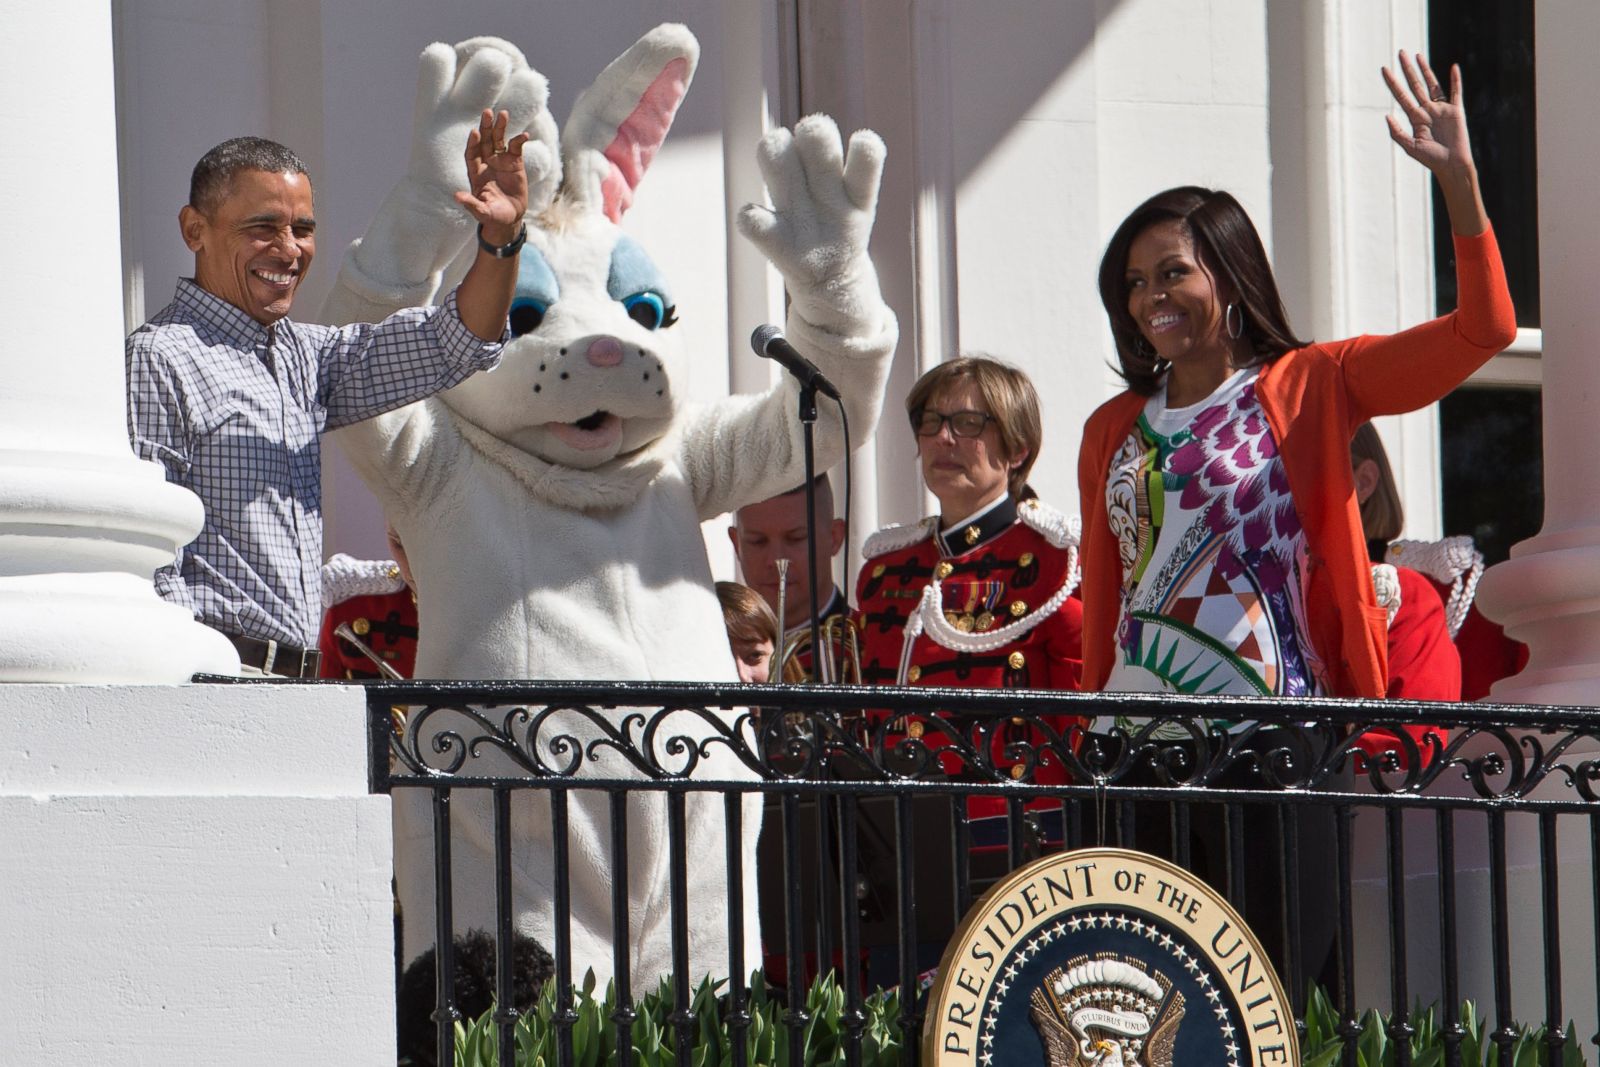 Eggcellent Photos of the White House Easter Egg Roll Photos Image